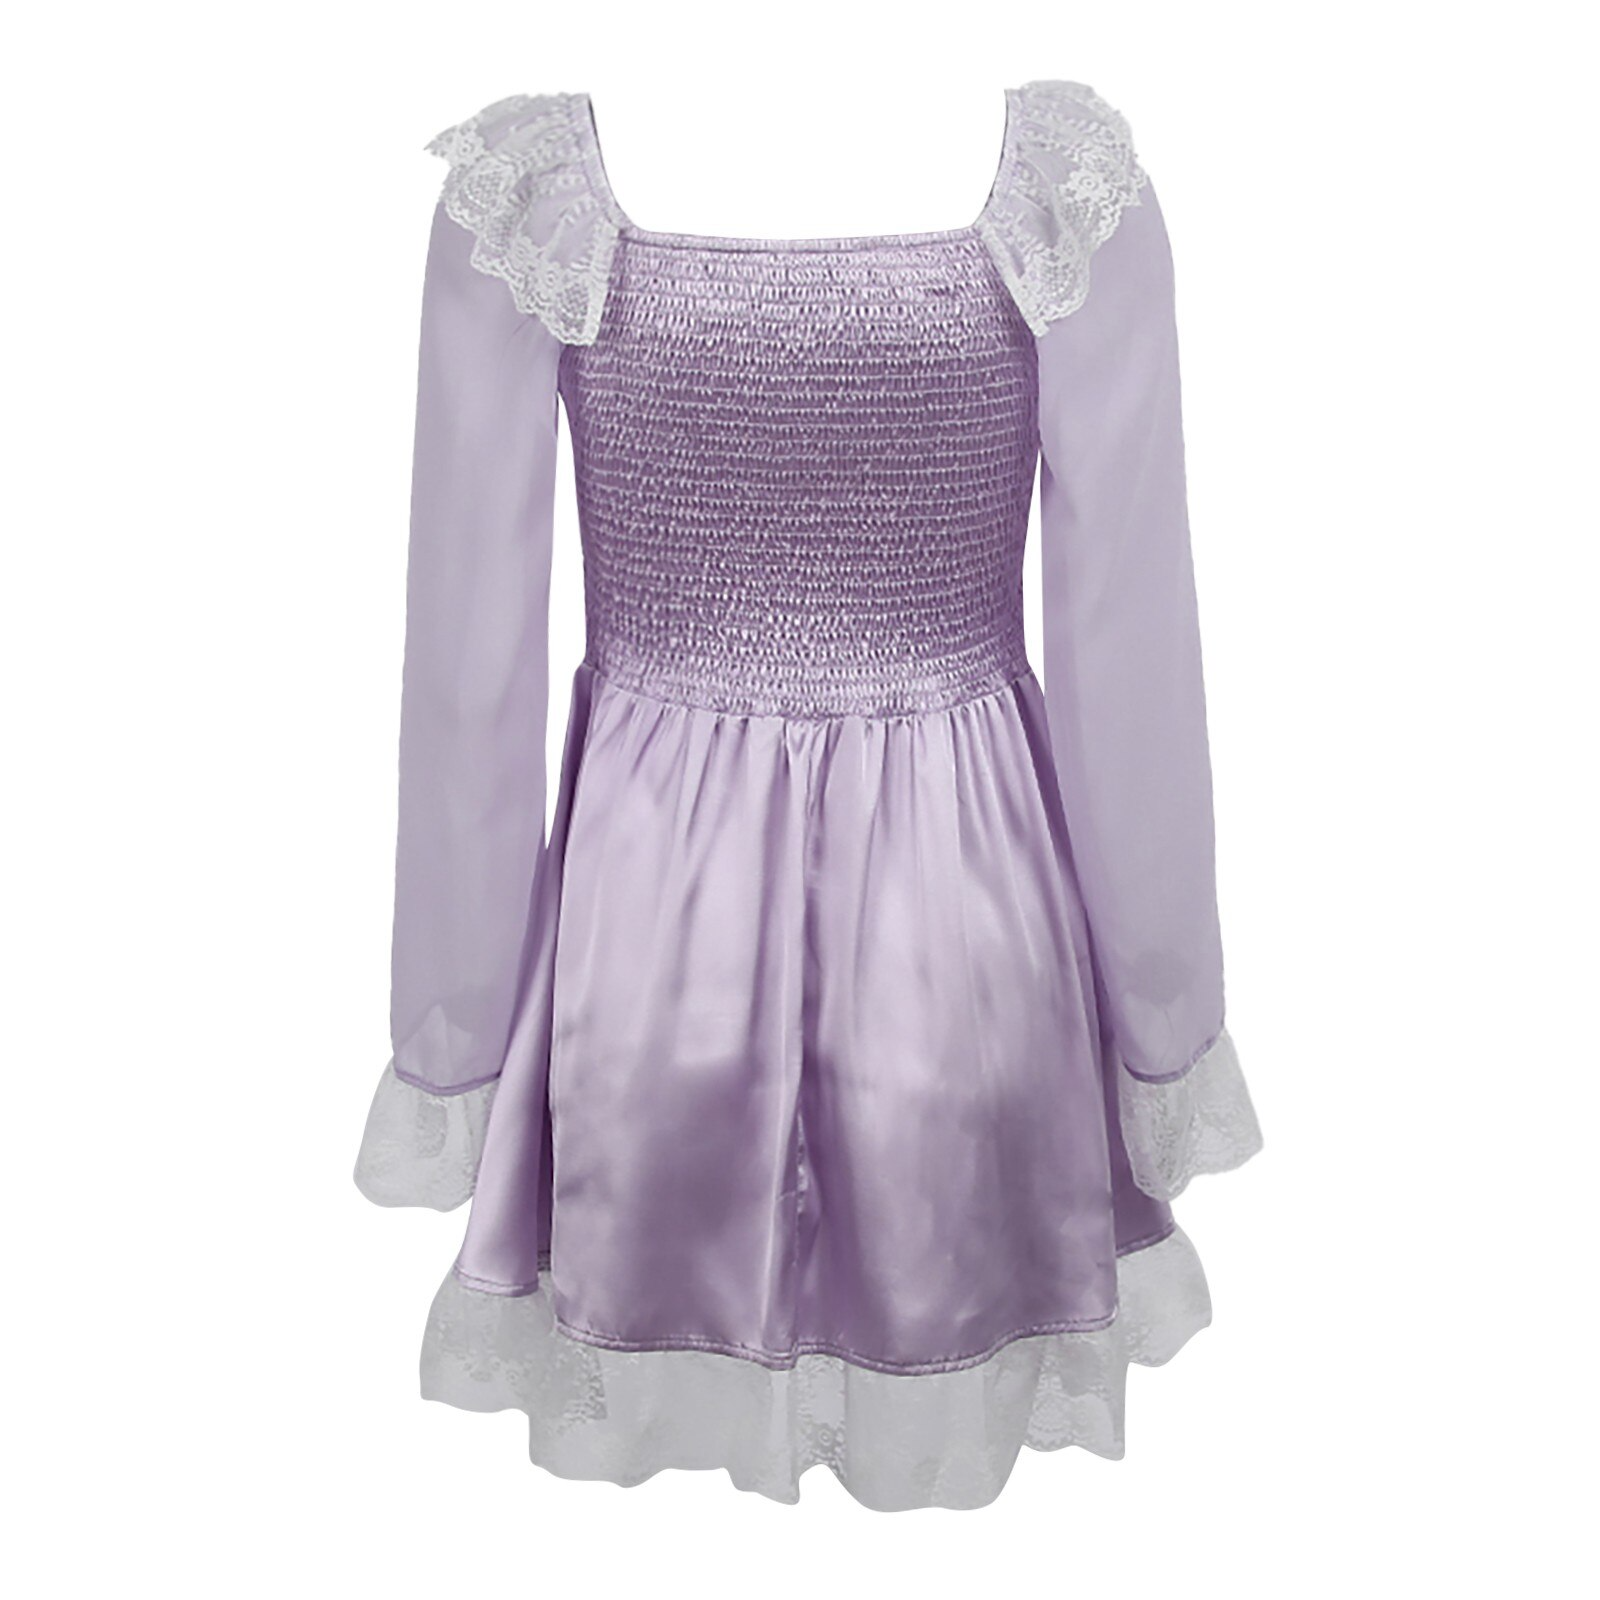 Sweet Lace Satin Dress Purple Turn-down Neck Coquette Aesthetic A-line Mini Corset Dresses Party Holiday Kawaii Outfit